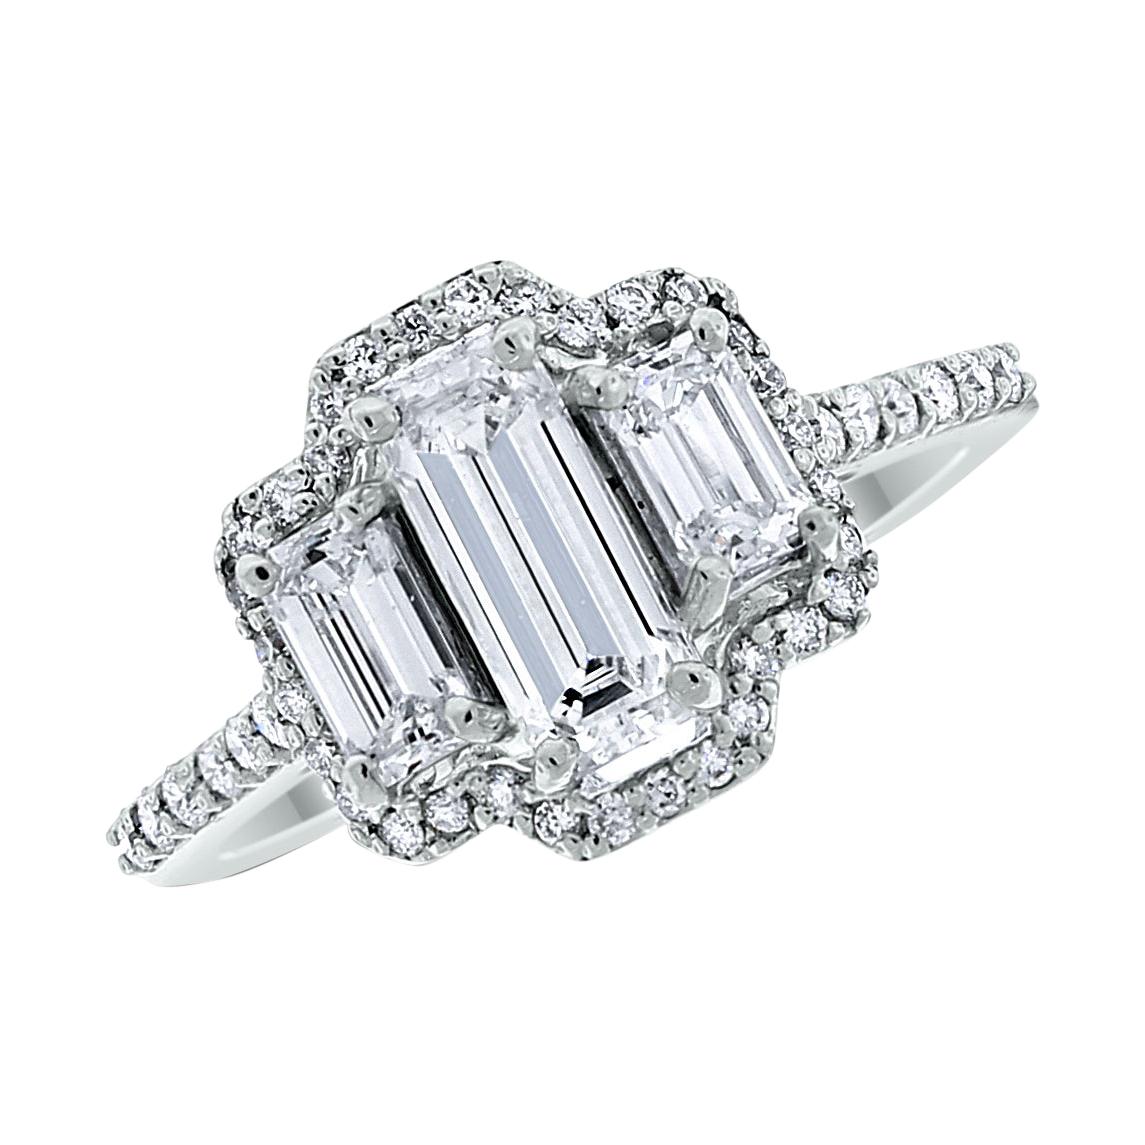 Beauvince Diana Engagement Ring 1.28 Carat Diamonds in White Gold For Sale